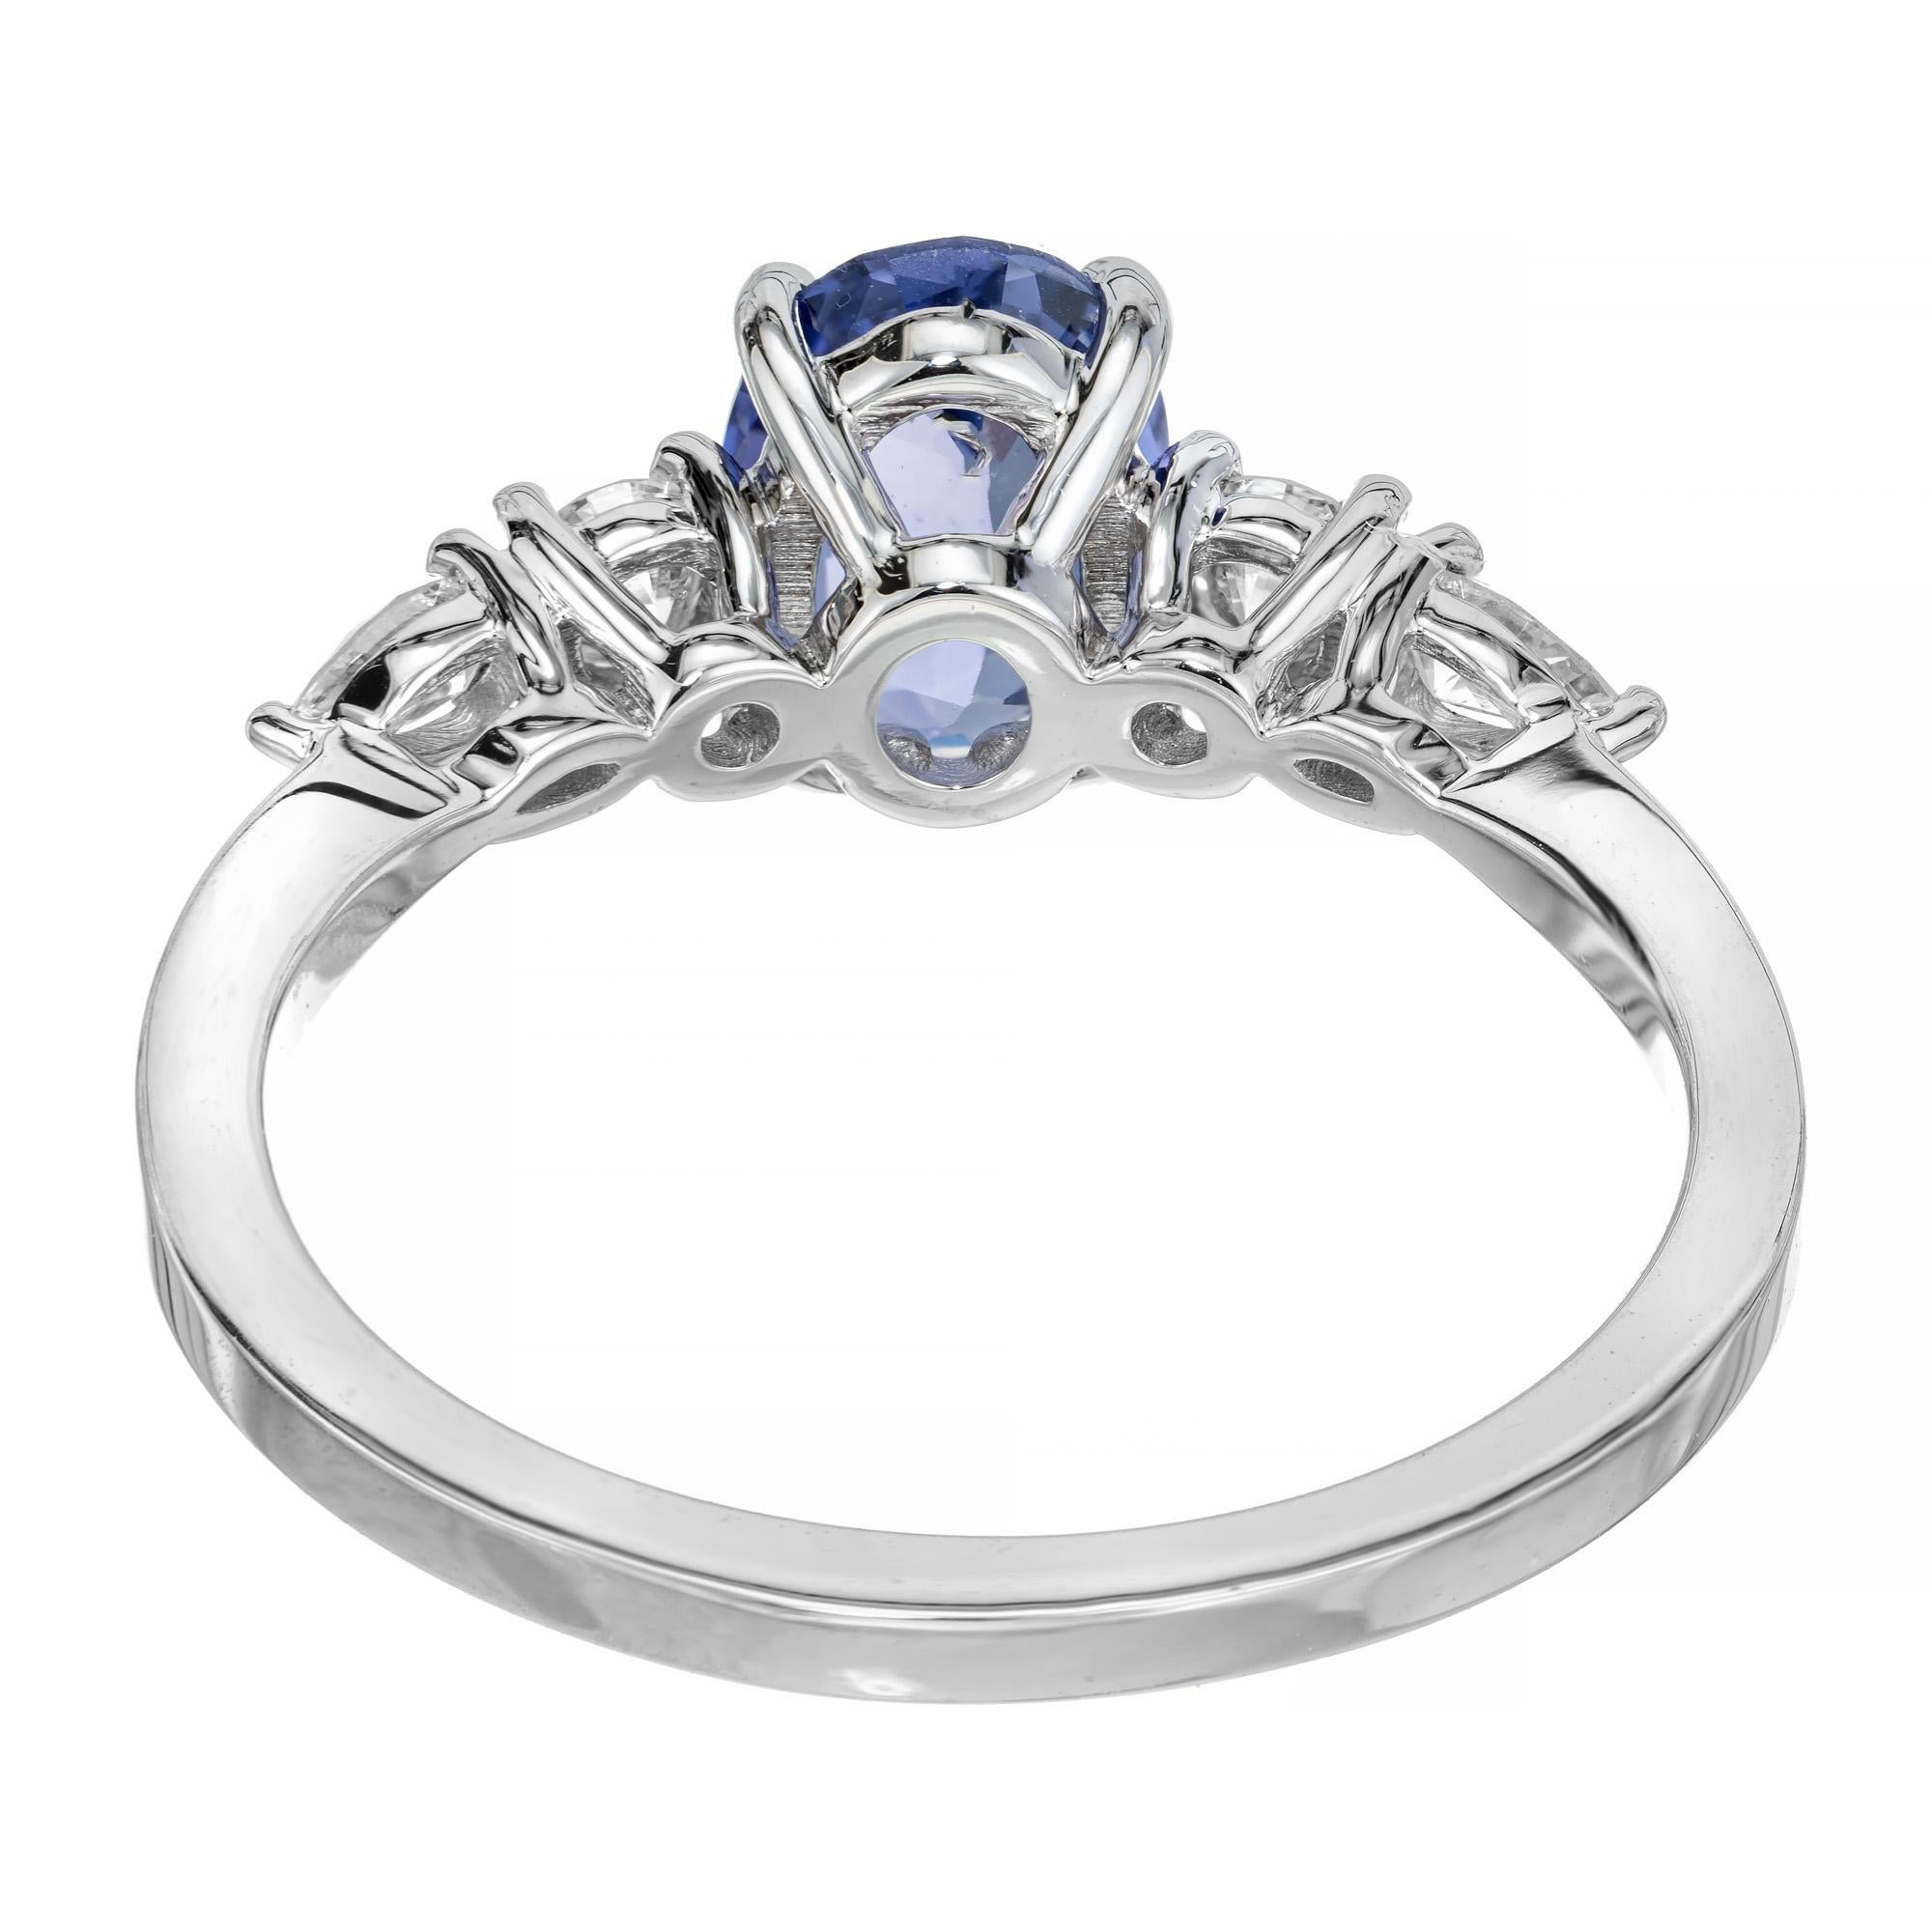 Peter Suchy GIA Certified 1.11 Carat Sapphire Diamond White Gold Engagement Ring In New Condition For Sale In Stamford, CT